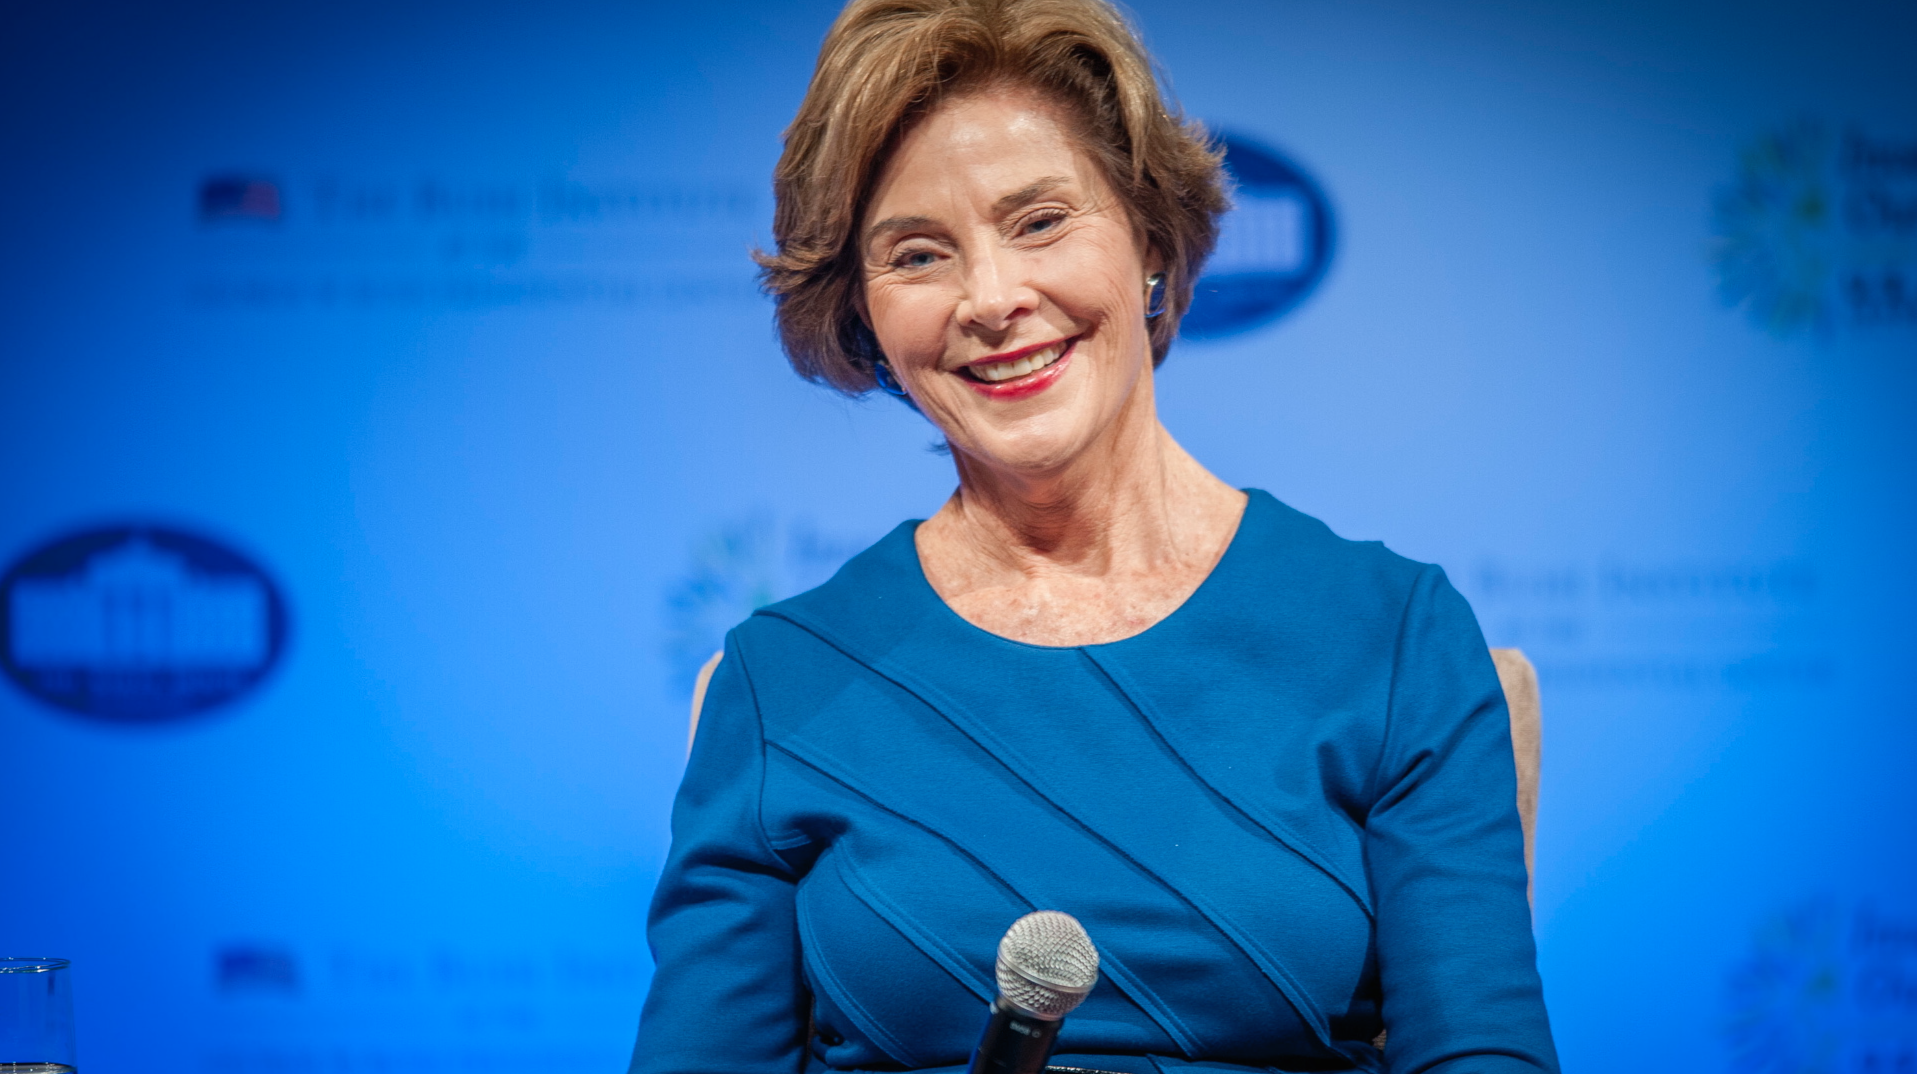 Laura Bush's latest role: Booster of her husband's legacy Washington Post